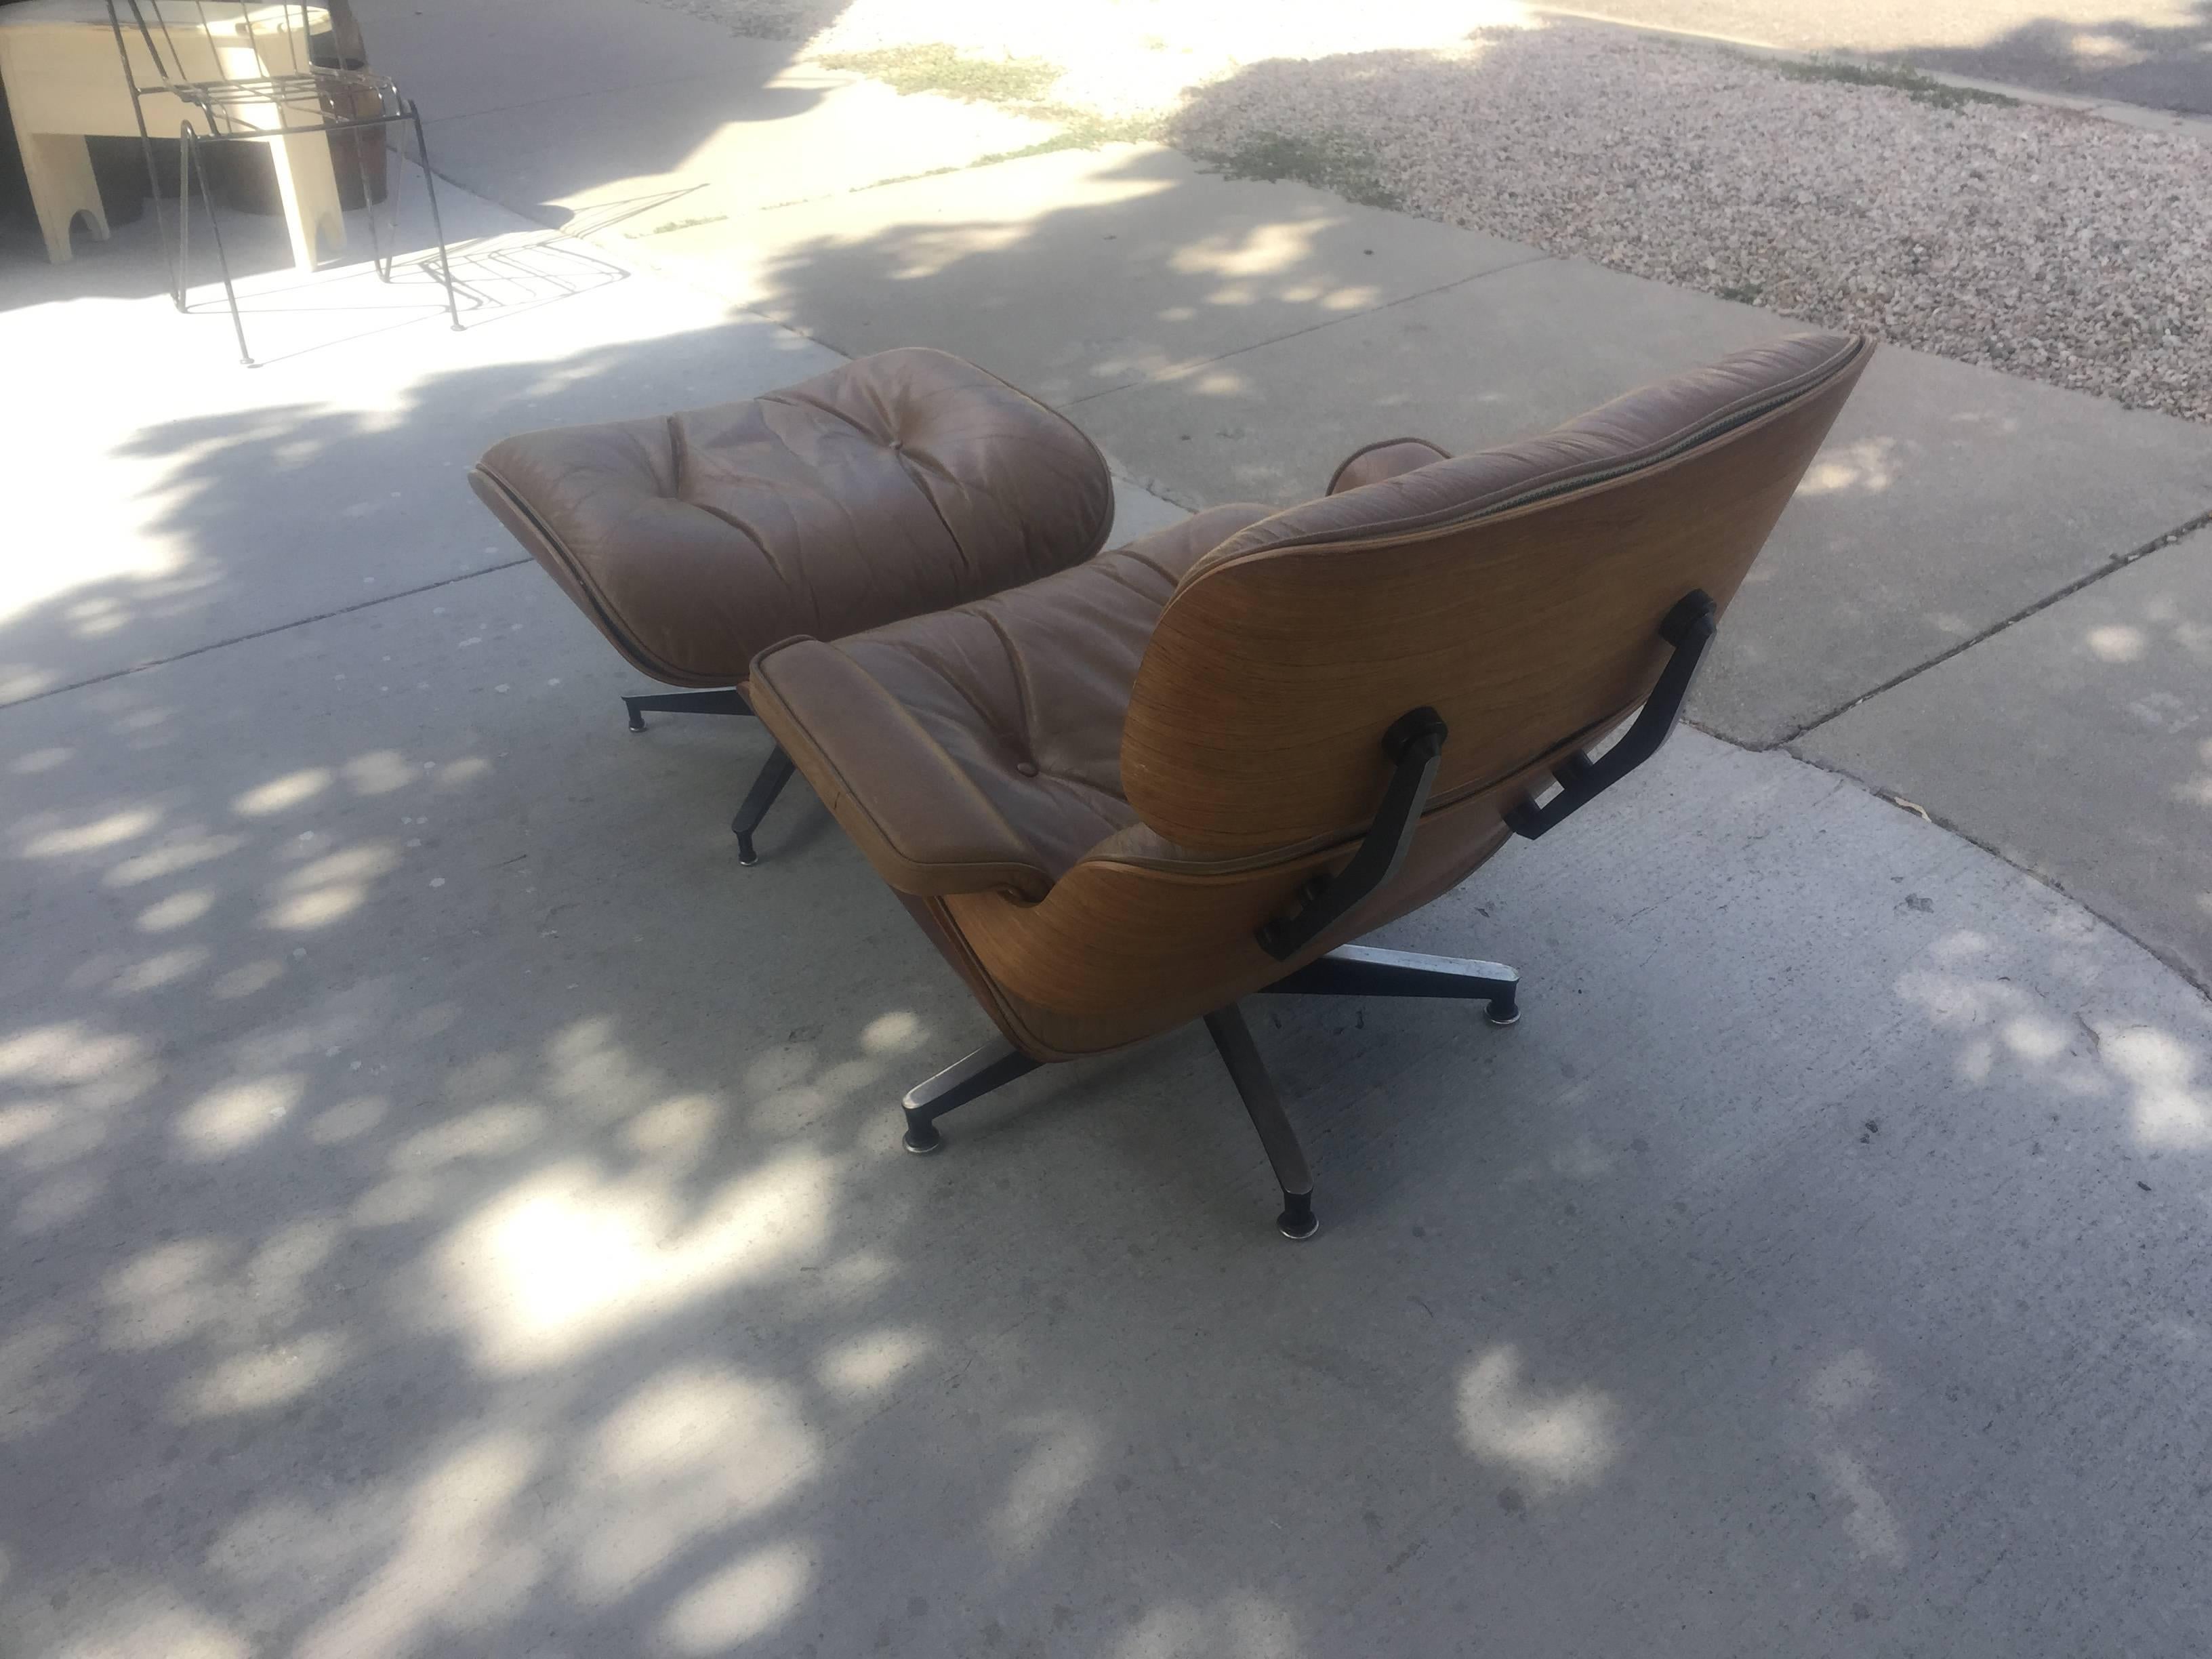 Vintage 1960s Eames lounge in camel leather and rosewood. It is in great condition with minor wear consistent with age.